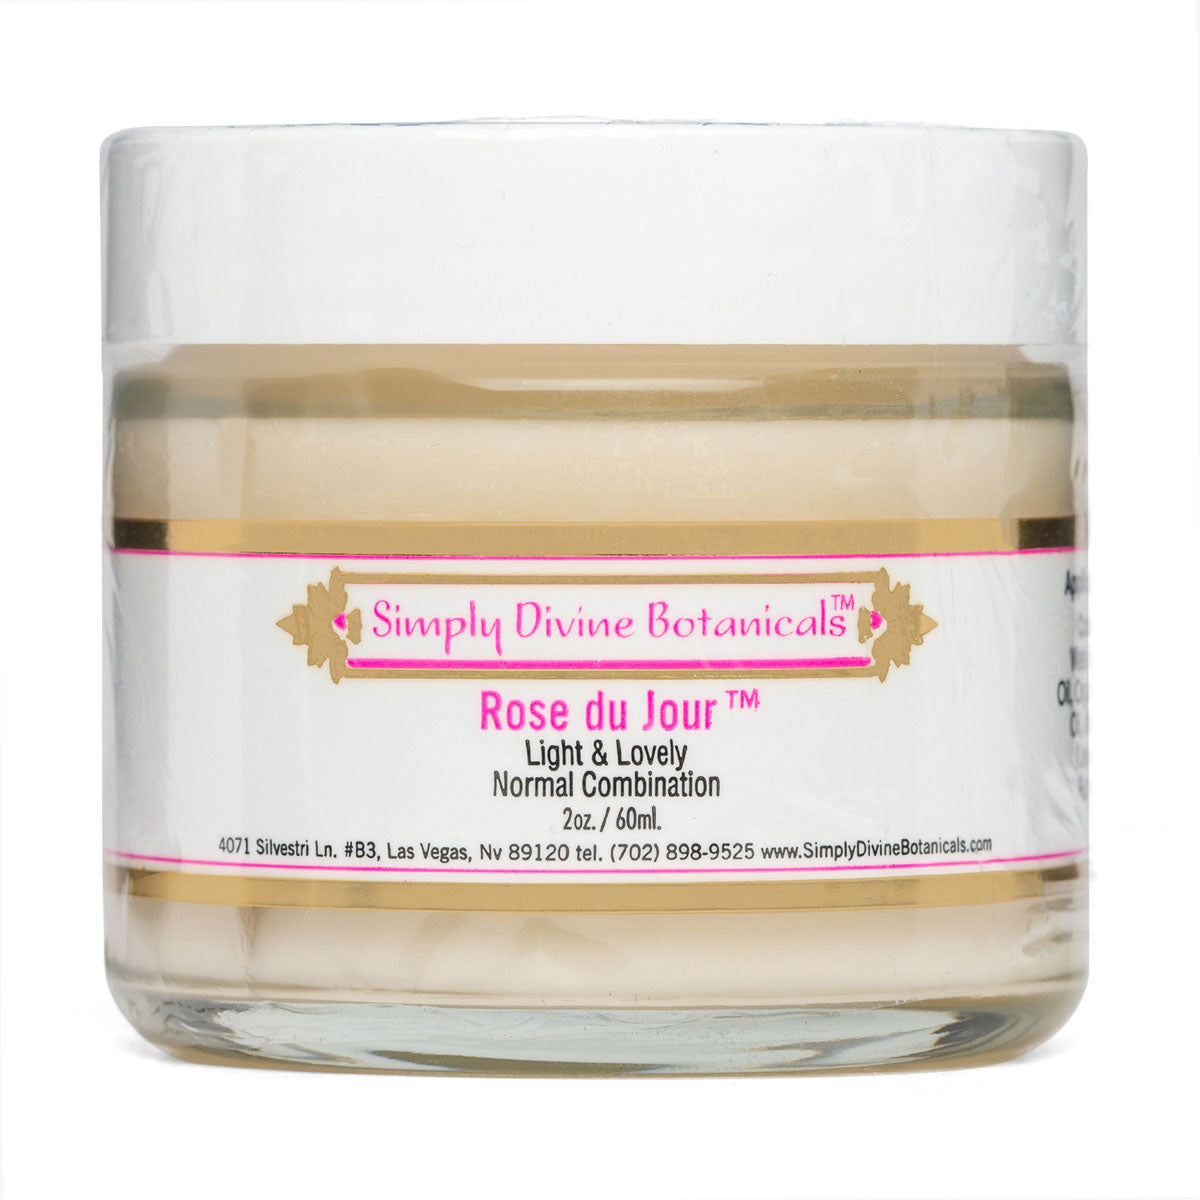 Rose Du Jour Moisturizer | Simply Divine Botanicals | Raw Living UK | Skin Care &amp; Beauty | Simply Divine Botanicals Natural Creme de Rose Facial Moisturiser for Normal, Combination &amp; Oily Skin. Use for Light, Lovely &amp; Luscious Skin.